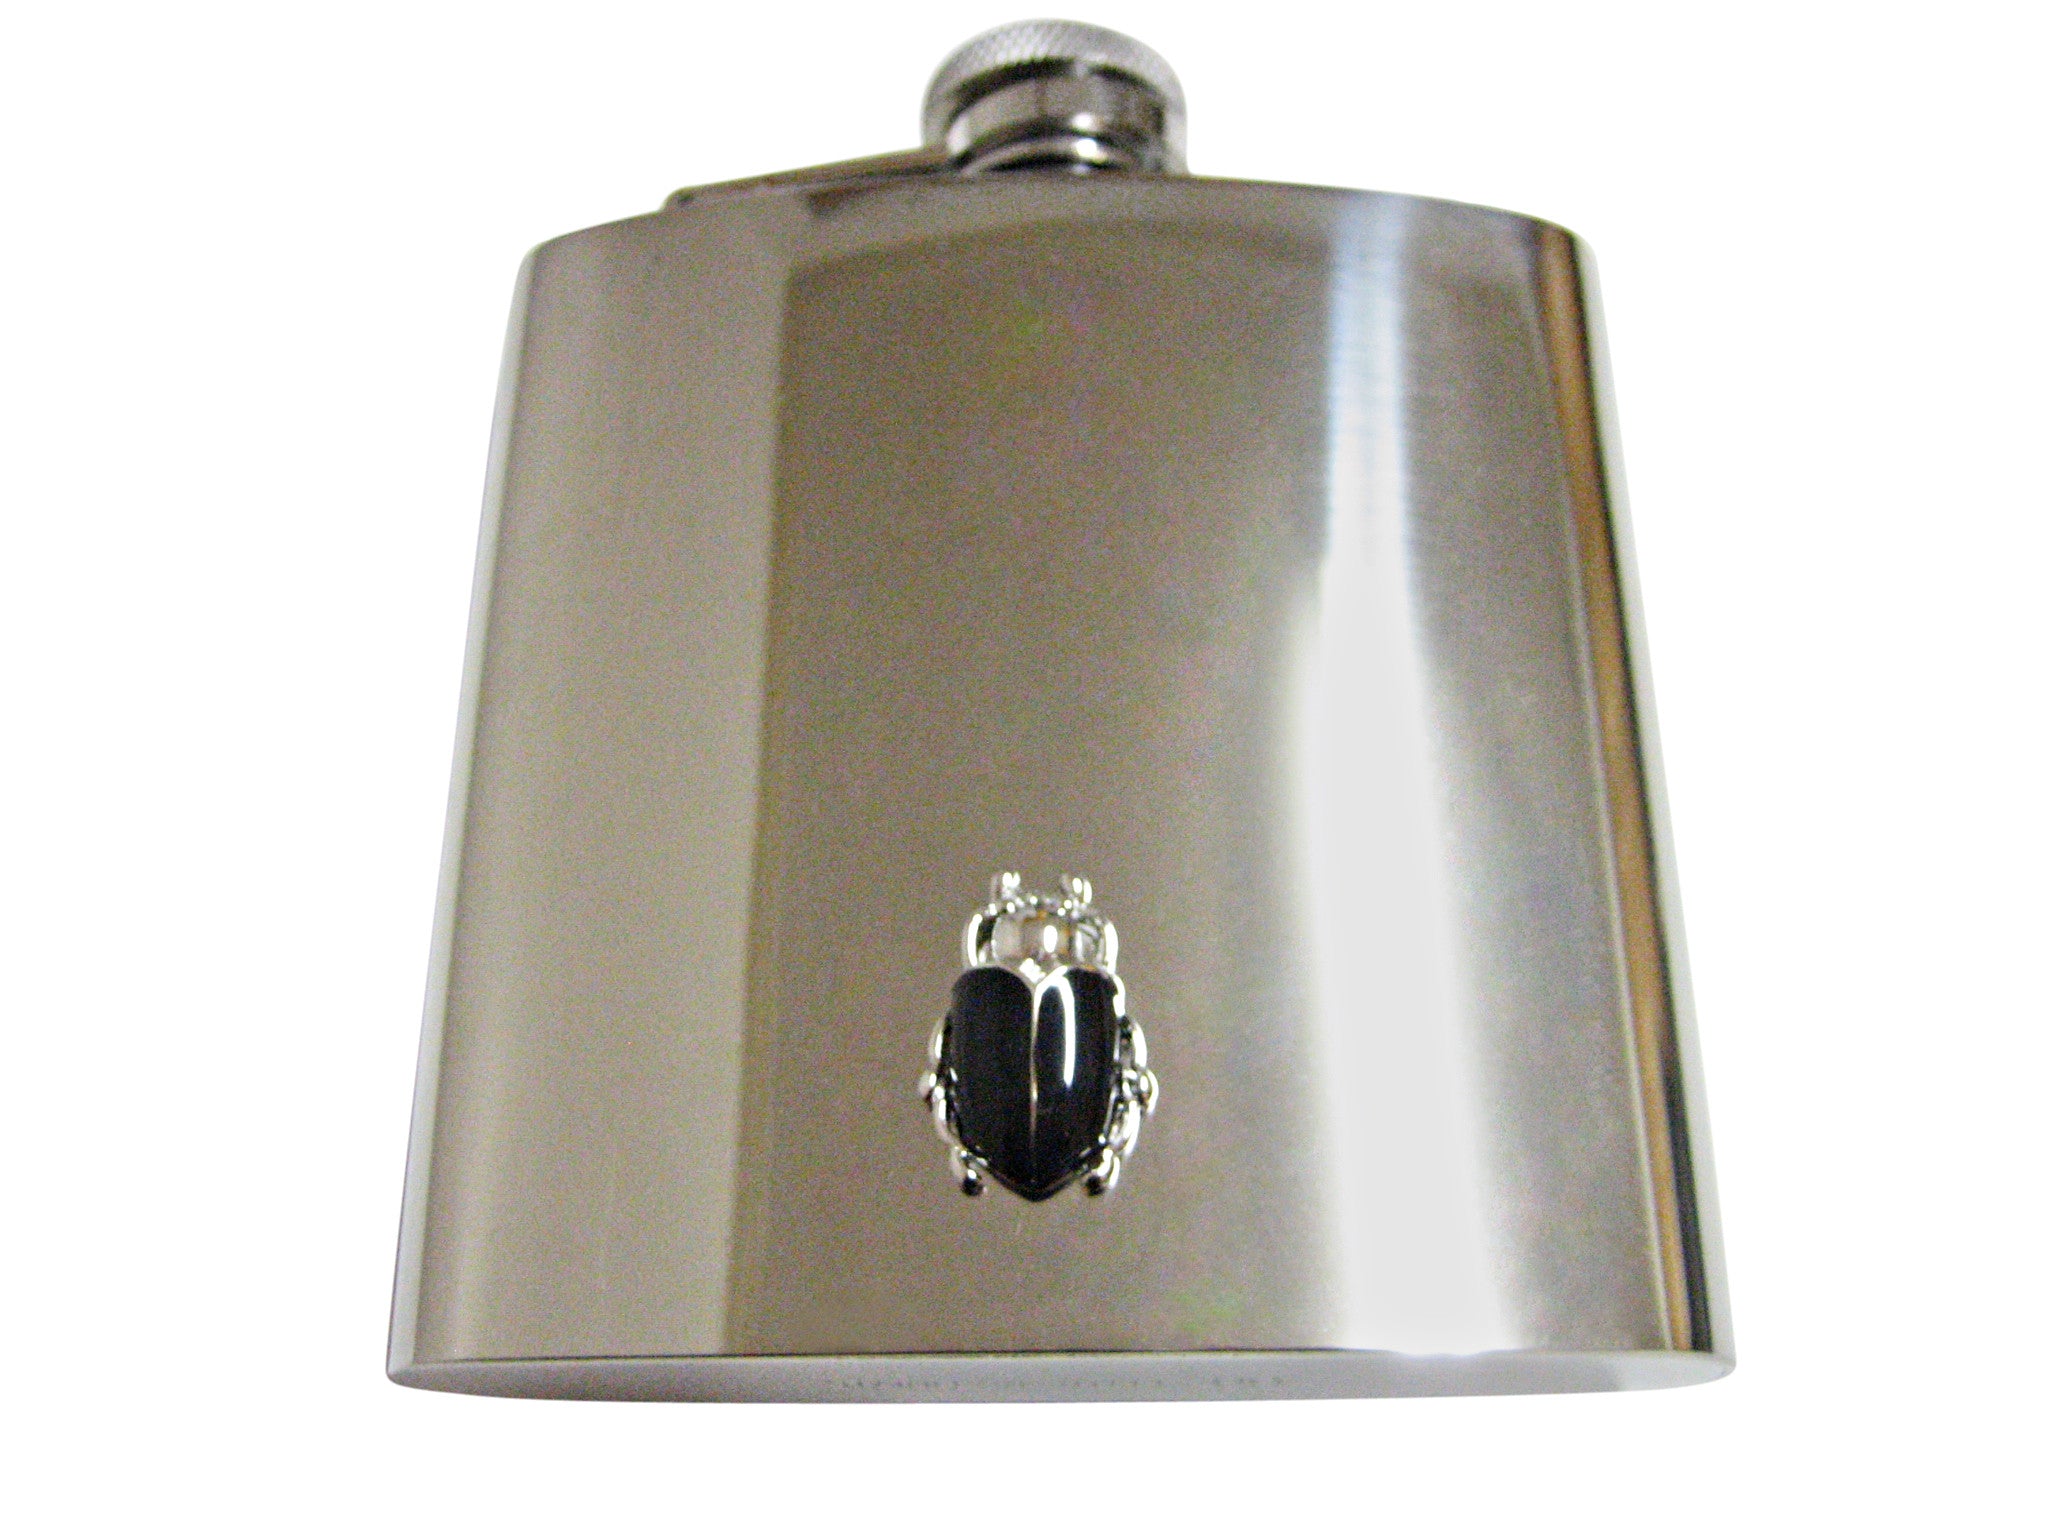 Black Beetle Insect 6 Oz. Stainless Steel Flask